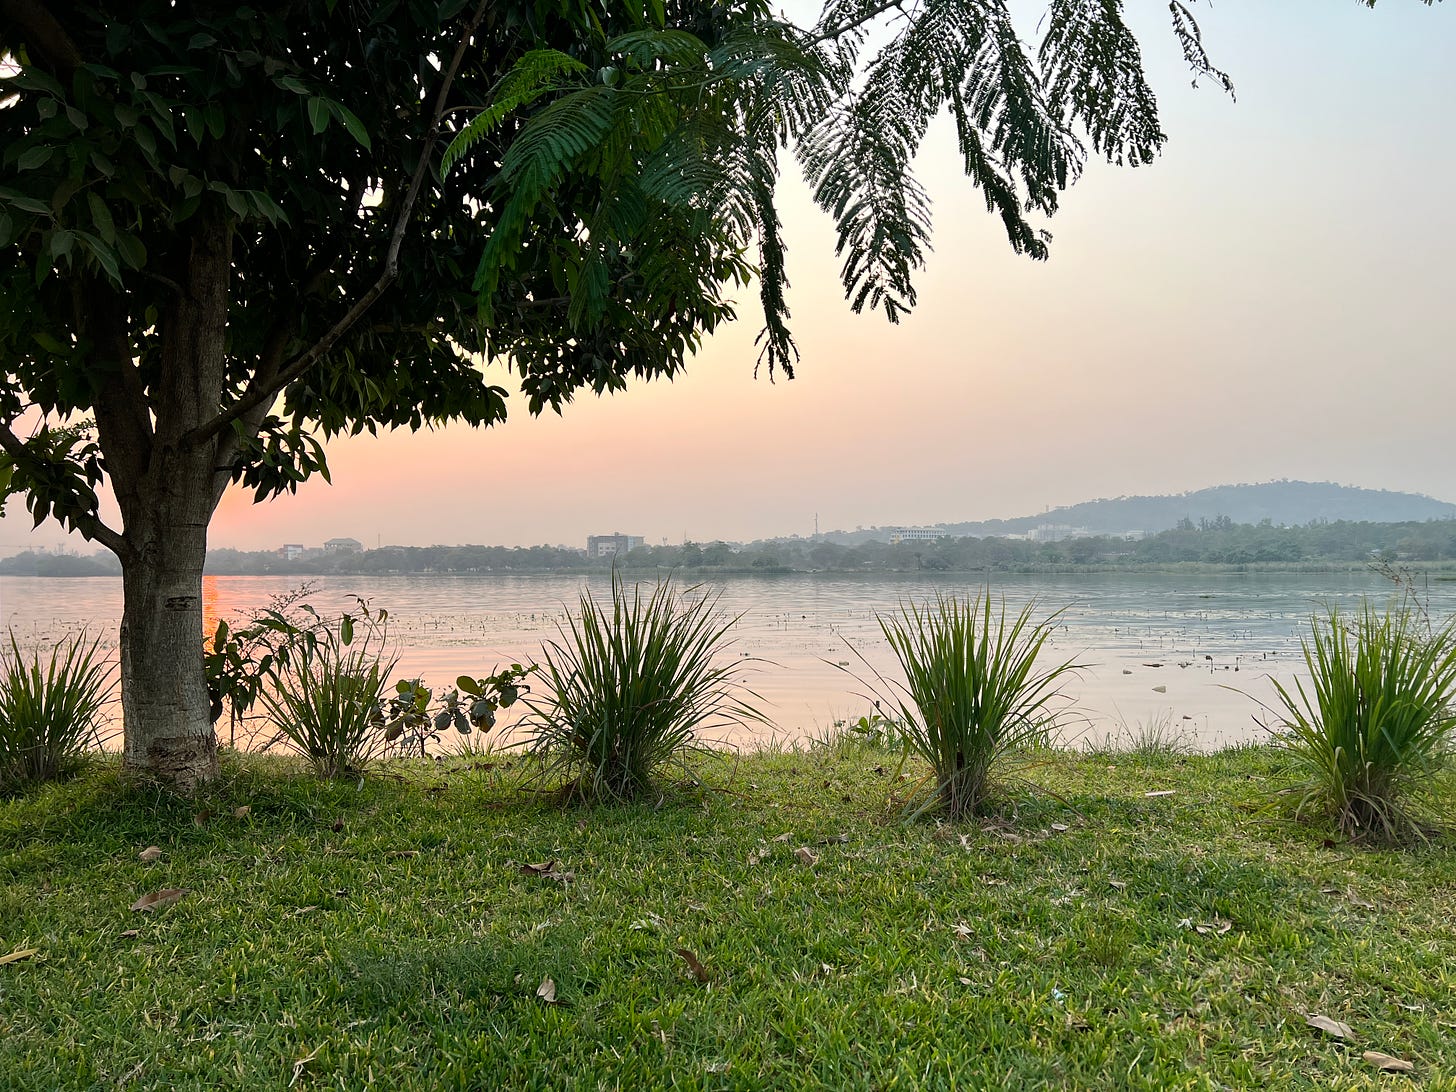 A calming view of a man-made lake in Abuja, Nigeria